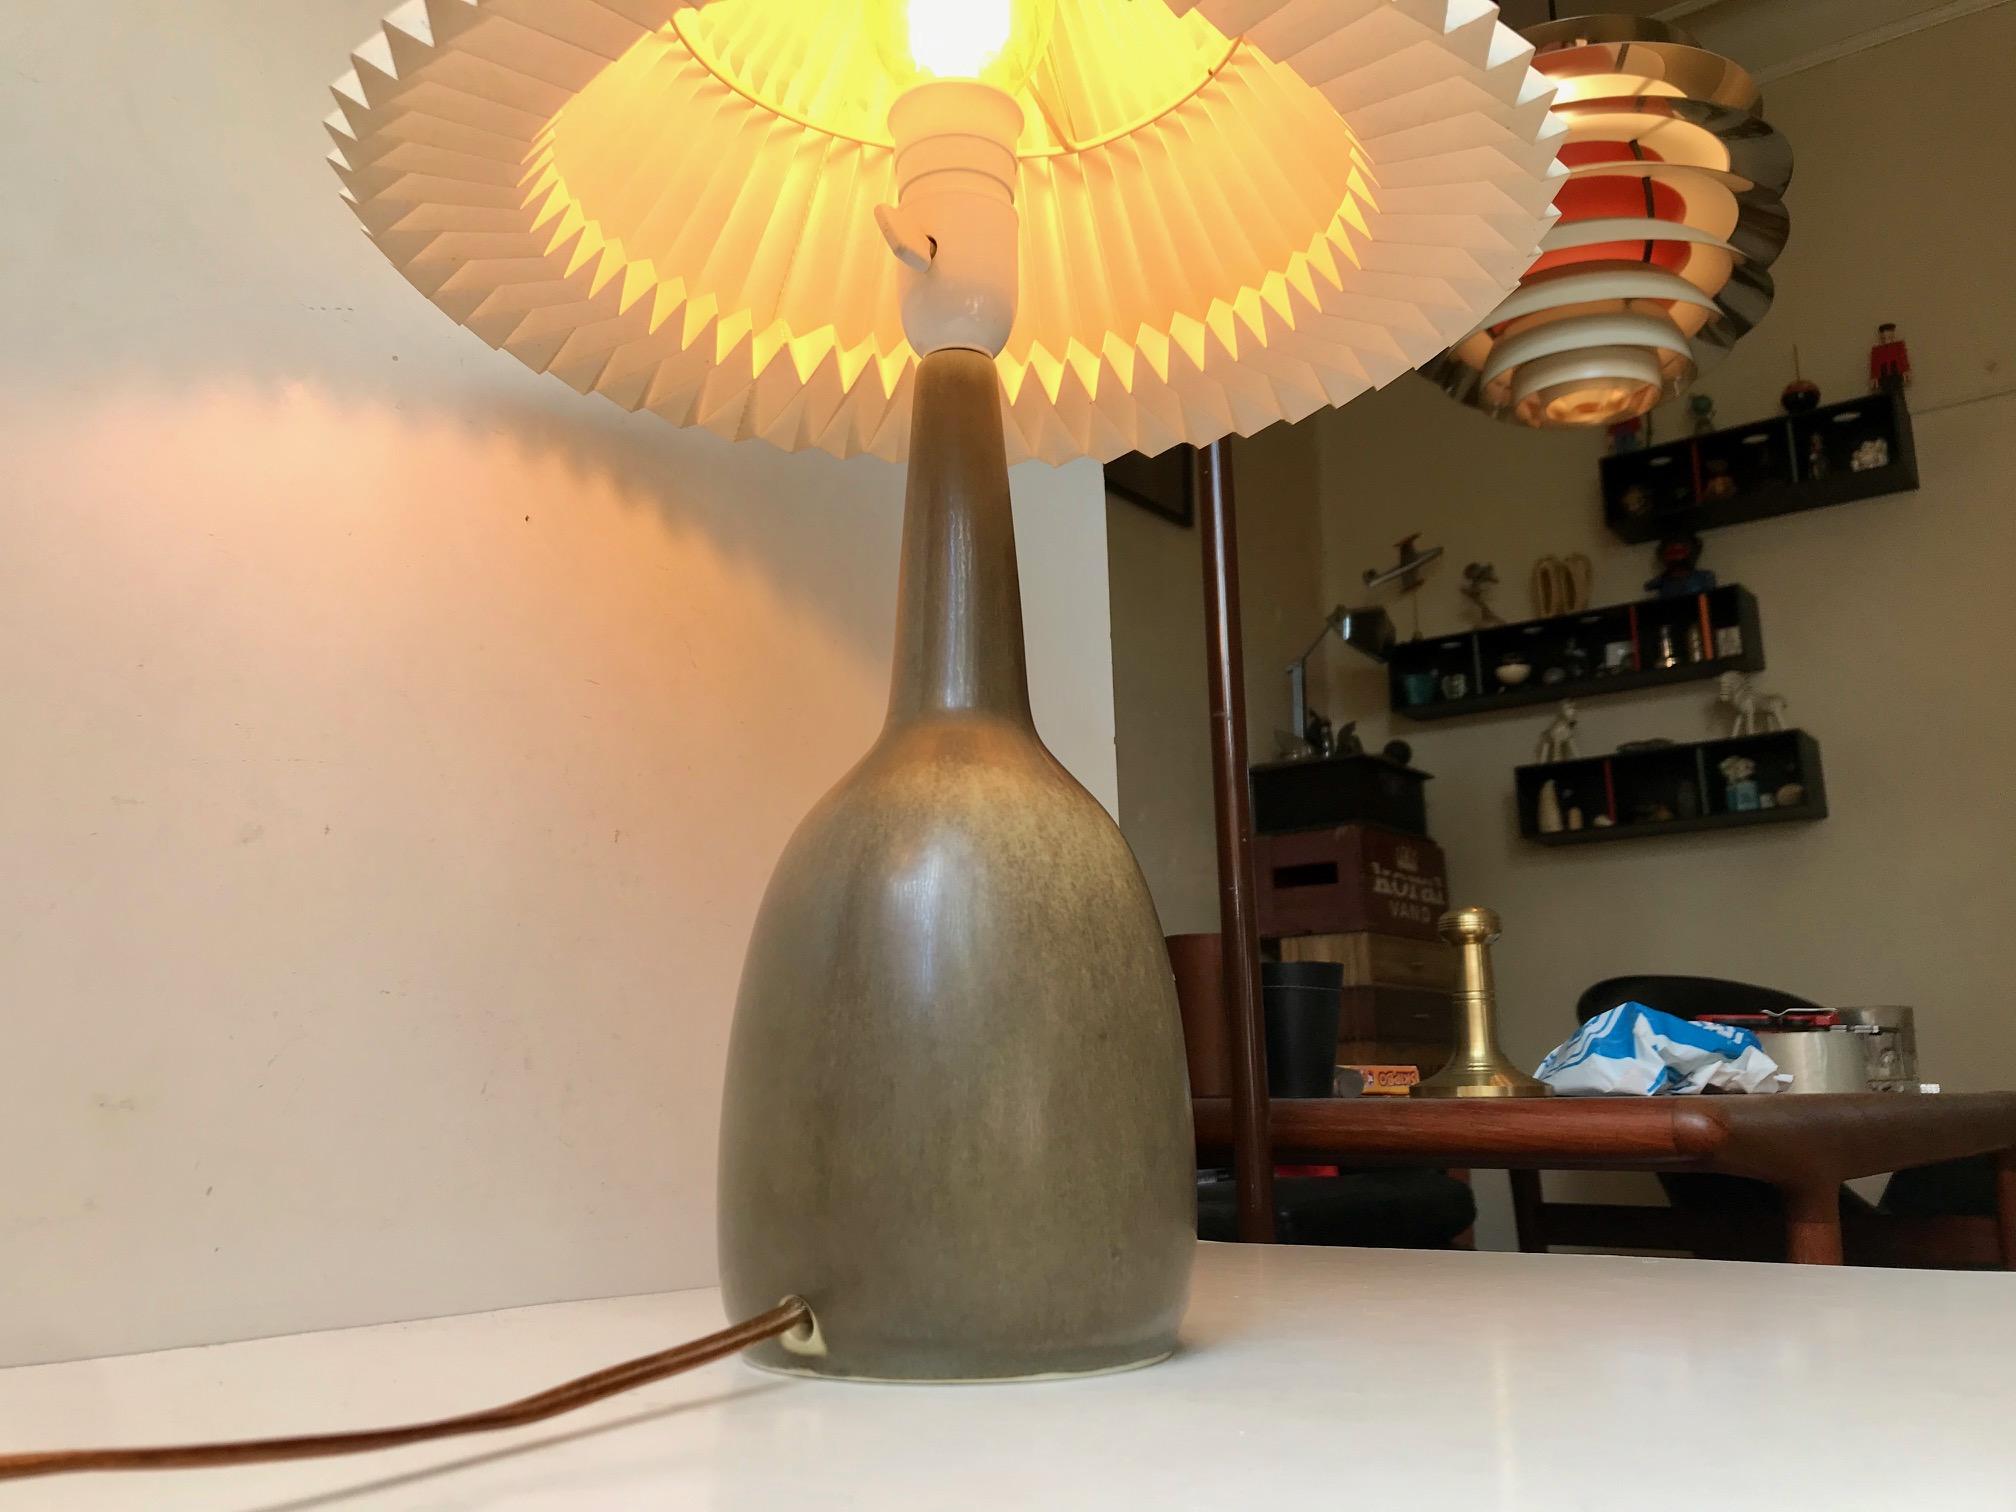 A rare gourd shaped ceramic table light with delicate exposed edges and olive green haresfur glaze. Very similar to designs by Bernt Friberg. This one is special and was made for Hafnia Liv (life insurance). It was designed by Per Linnemann-Schmidt